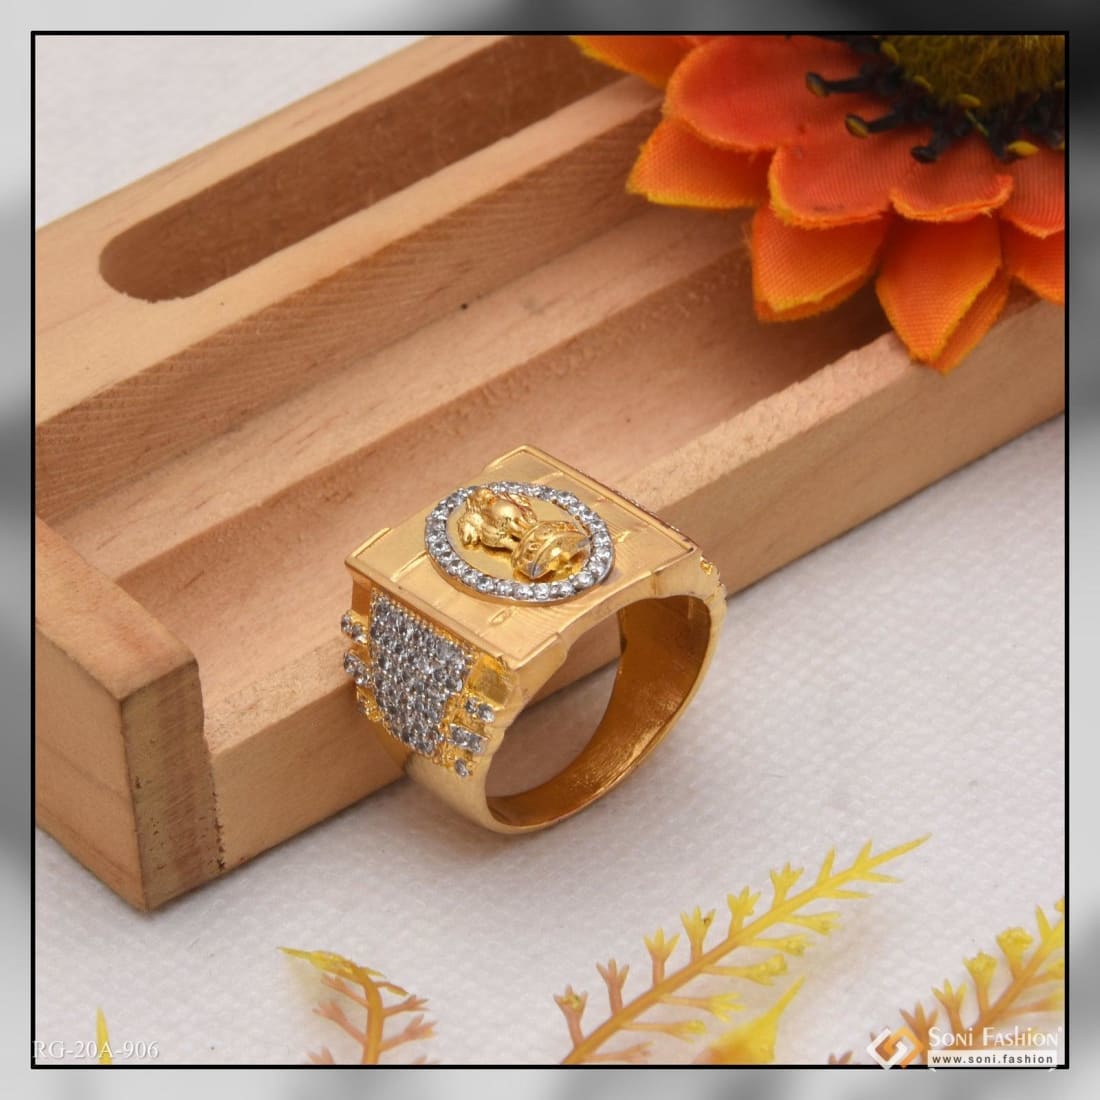 MEN'S YELLOW GOLD FASHION RING WITH TEXTURED PATTERN AND BLACK DIAMOND -  Howard's Jewelry Center